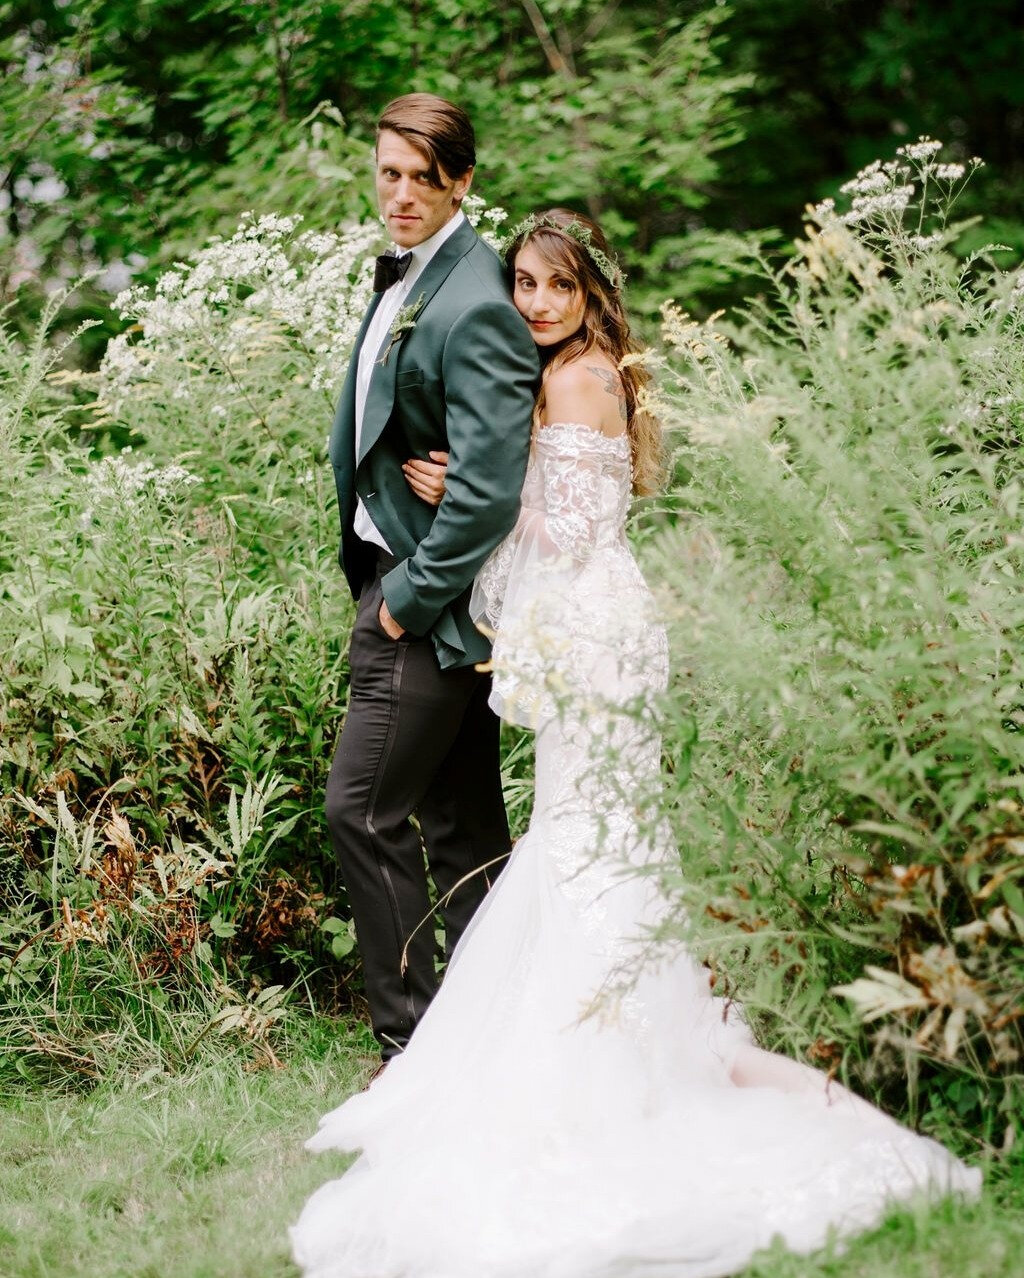 It&rsquo;s all about a green color palette this month! 🌿 From the fern bridal crown to the green suit jacket, this styled shoot is dripping in emerald green details. Inspired by the medieval Renaissance and modern, boho aesthetics, these photos capt